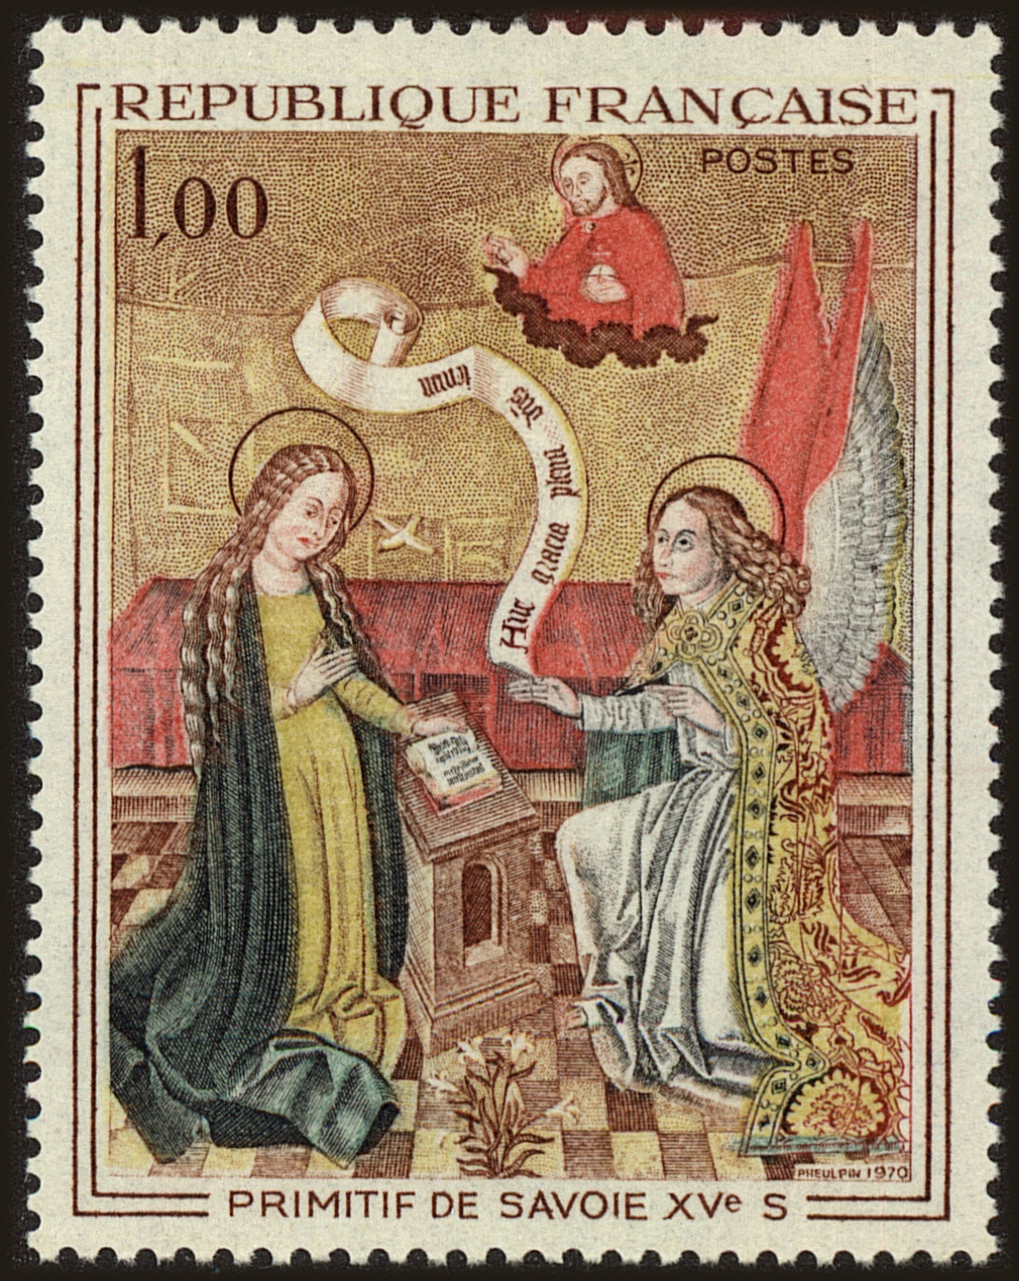 Front view of France 1273 collectors stamp